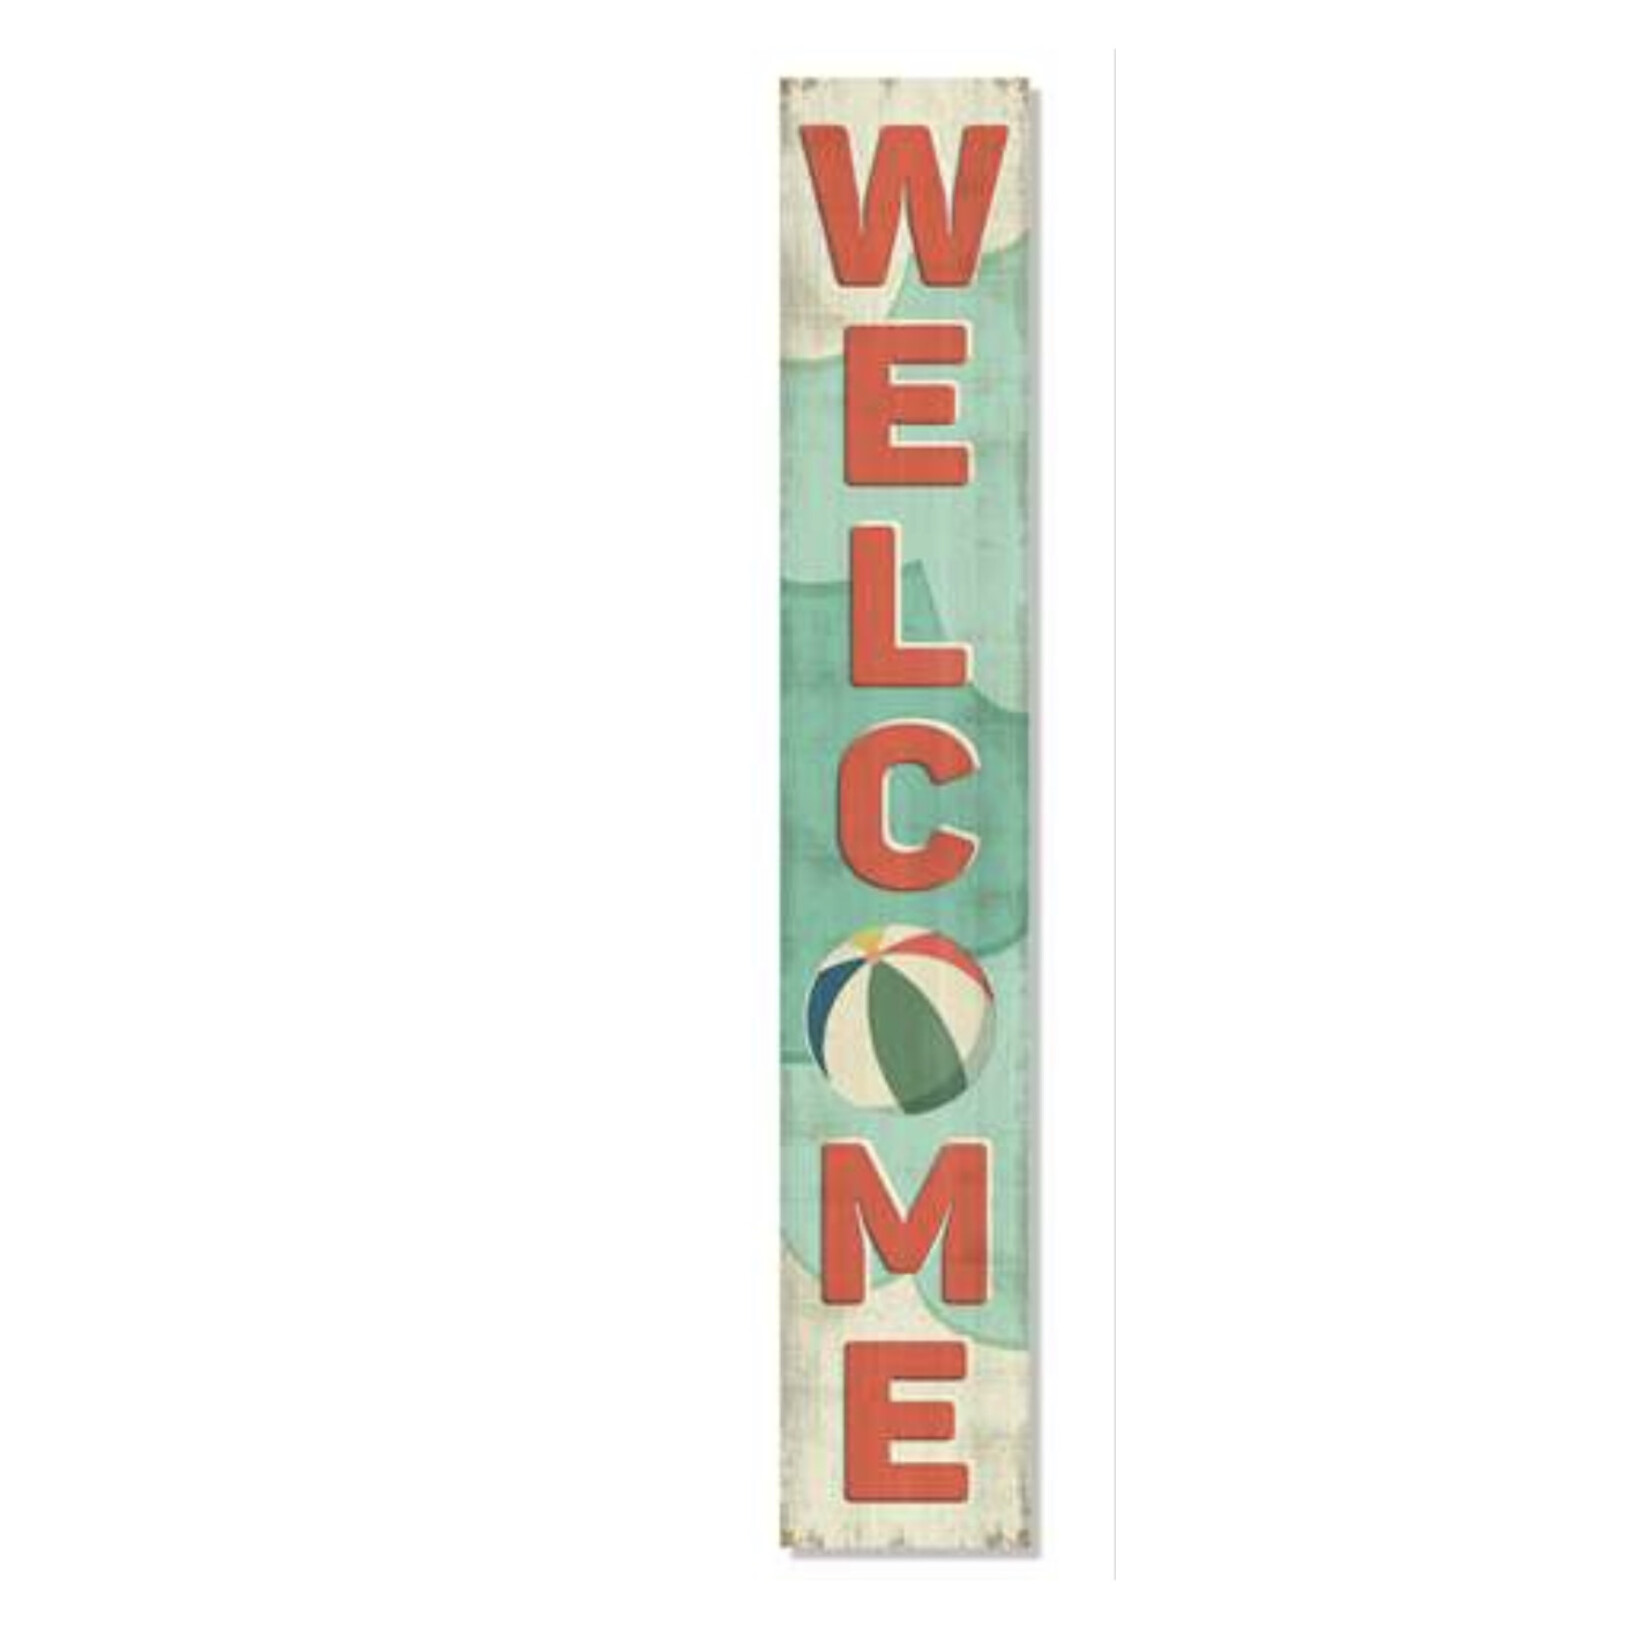 My Word! Welcome Beach Ball Porch Board Sign